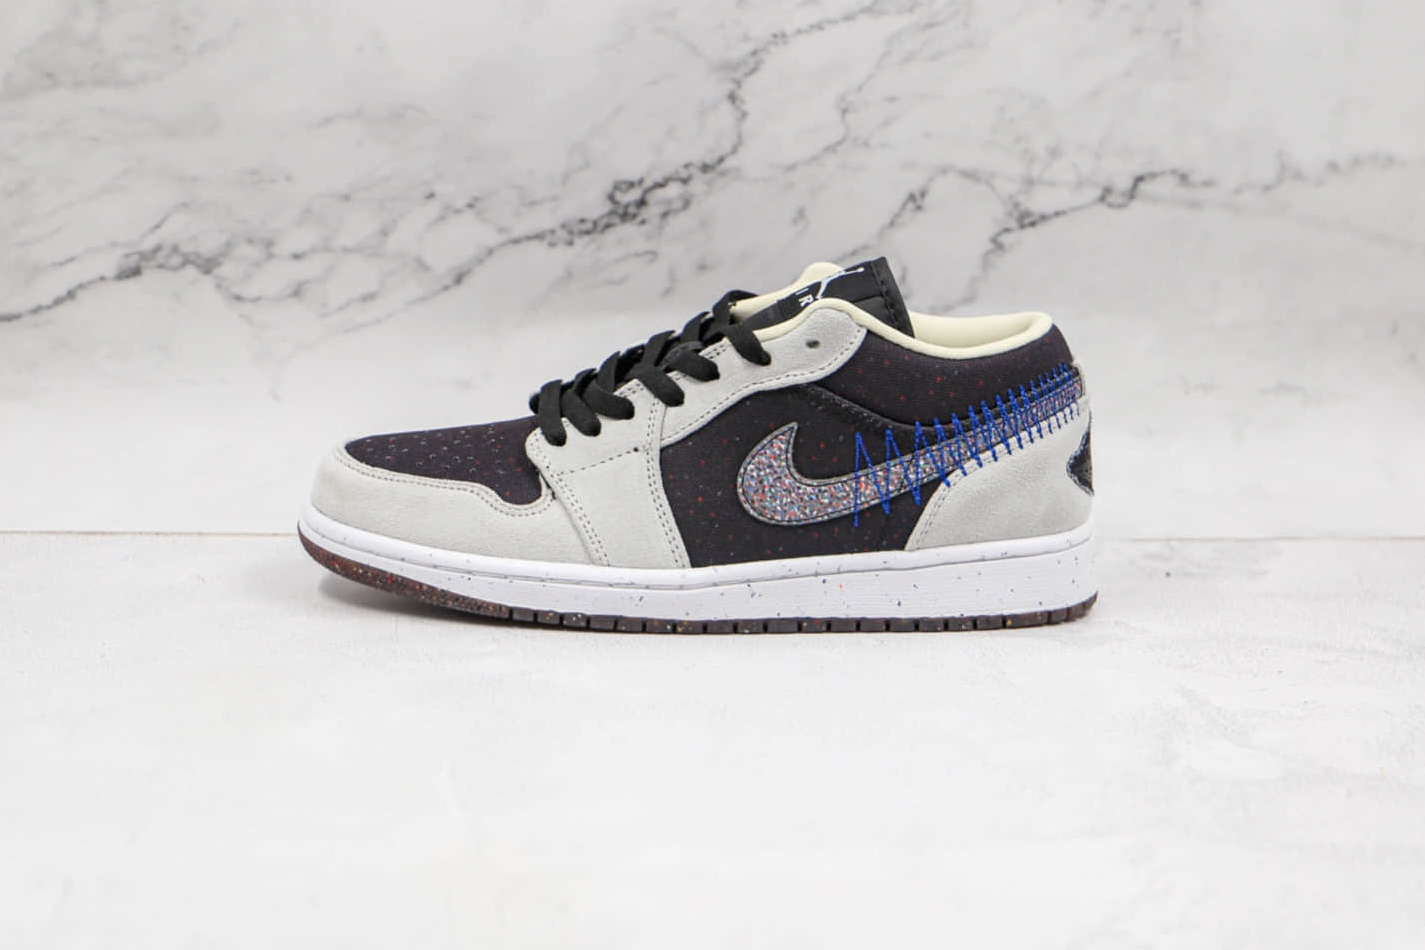 Air Jordan 1 Low 'Crater' DM4657-001 - Stylish and sustainable sneakers